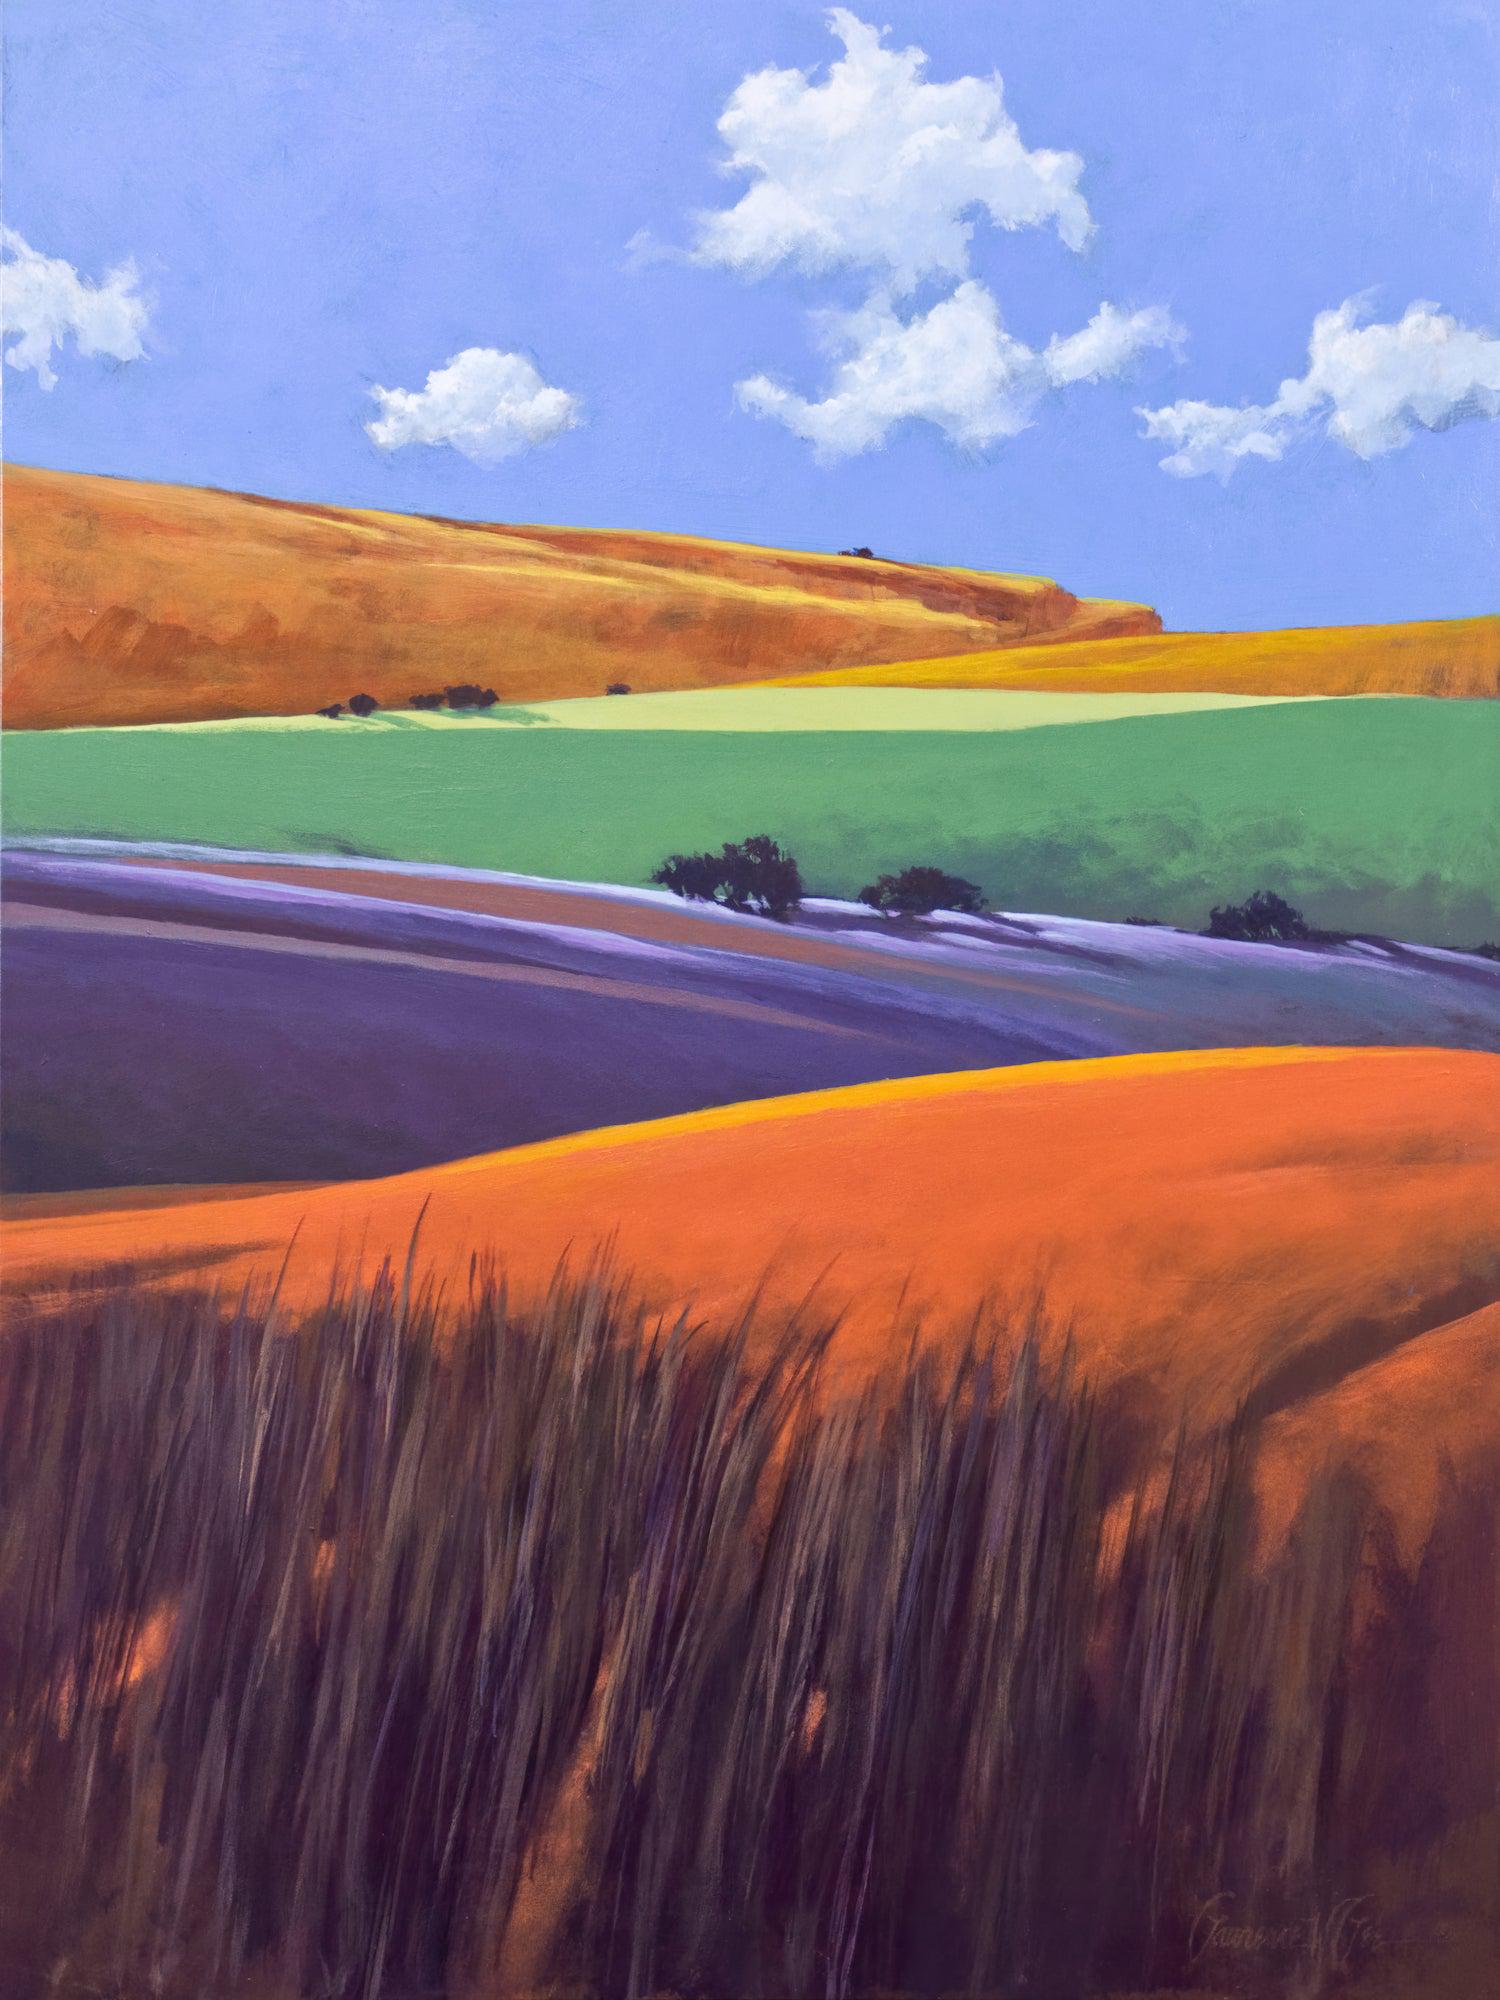 South of Big Candy Mountain-Painting-Lawrence Lee-Sorrel Sky Gallery